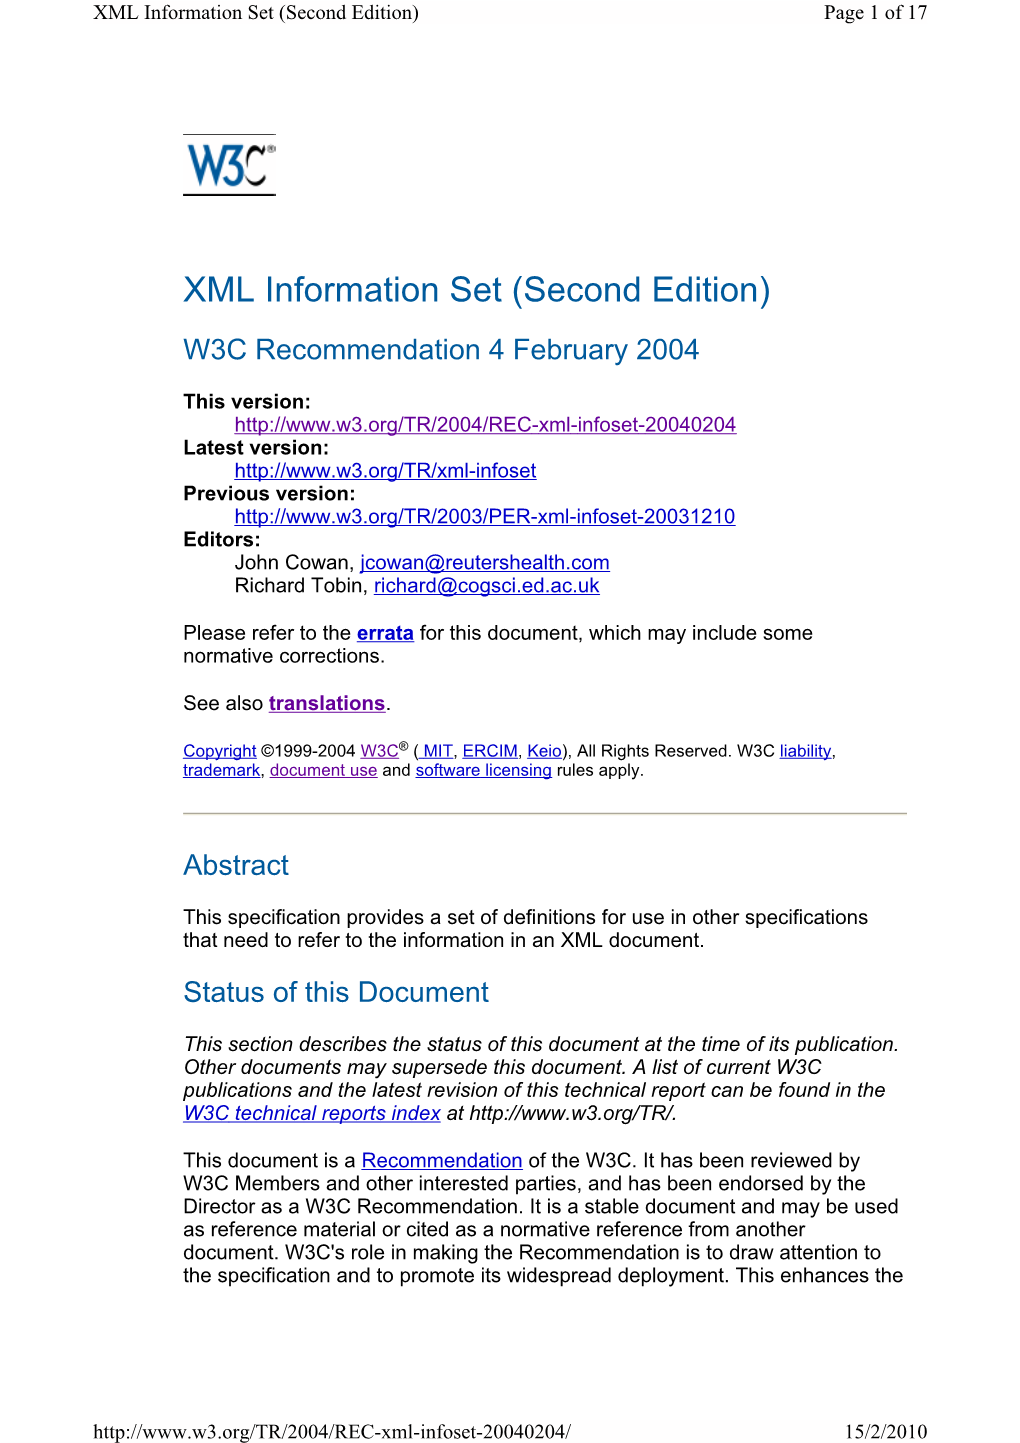 XML Information Set (Second Edition) Page 1 of 17